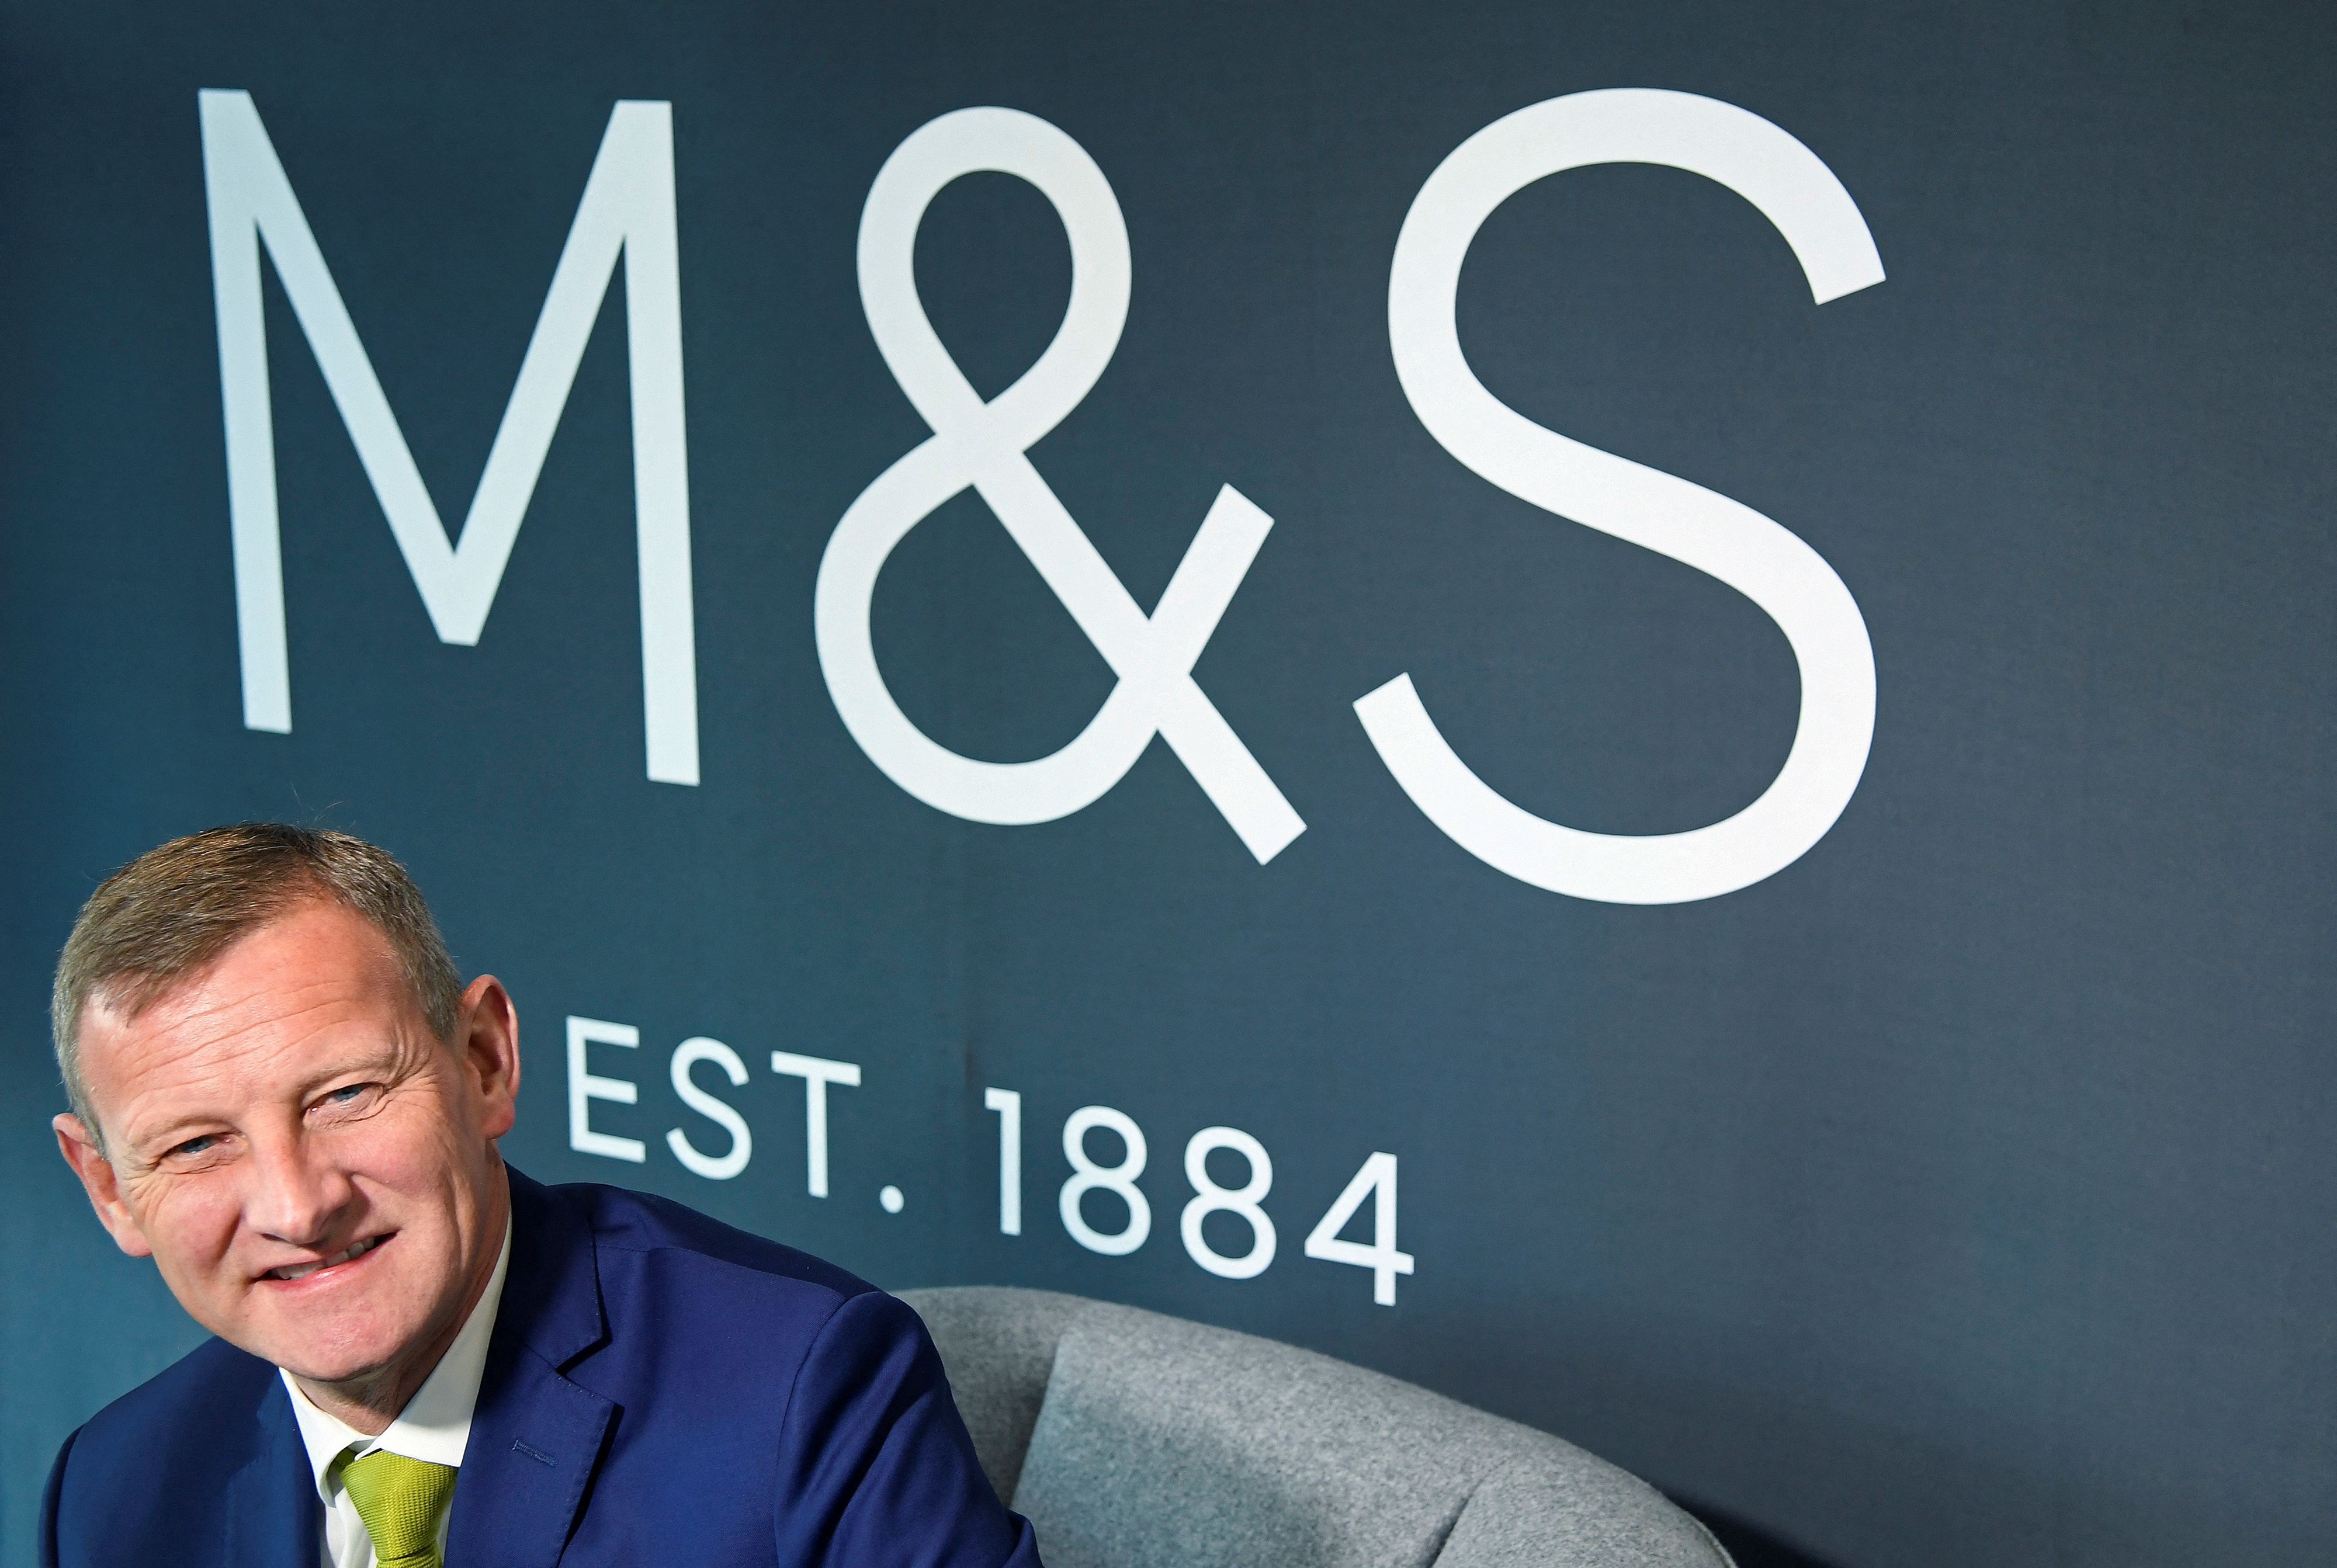 Rowe, CEO of Marks and Spencer, poses for a photograph at the company head office in London, Britain